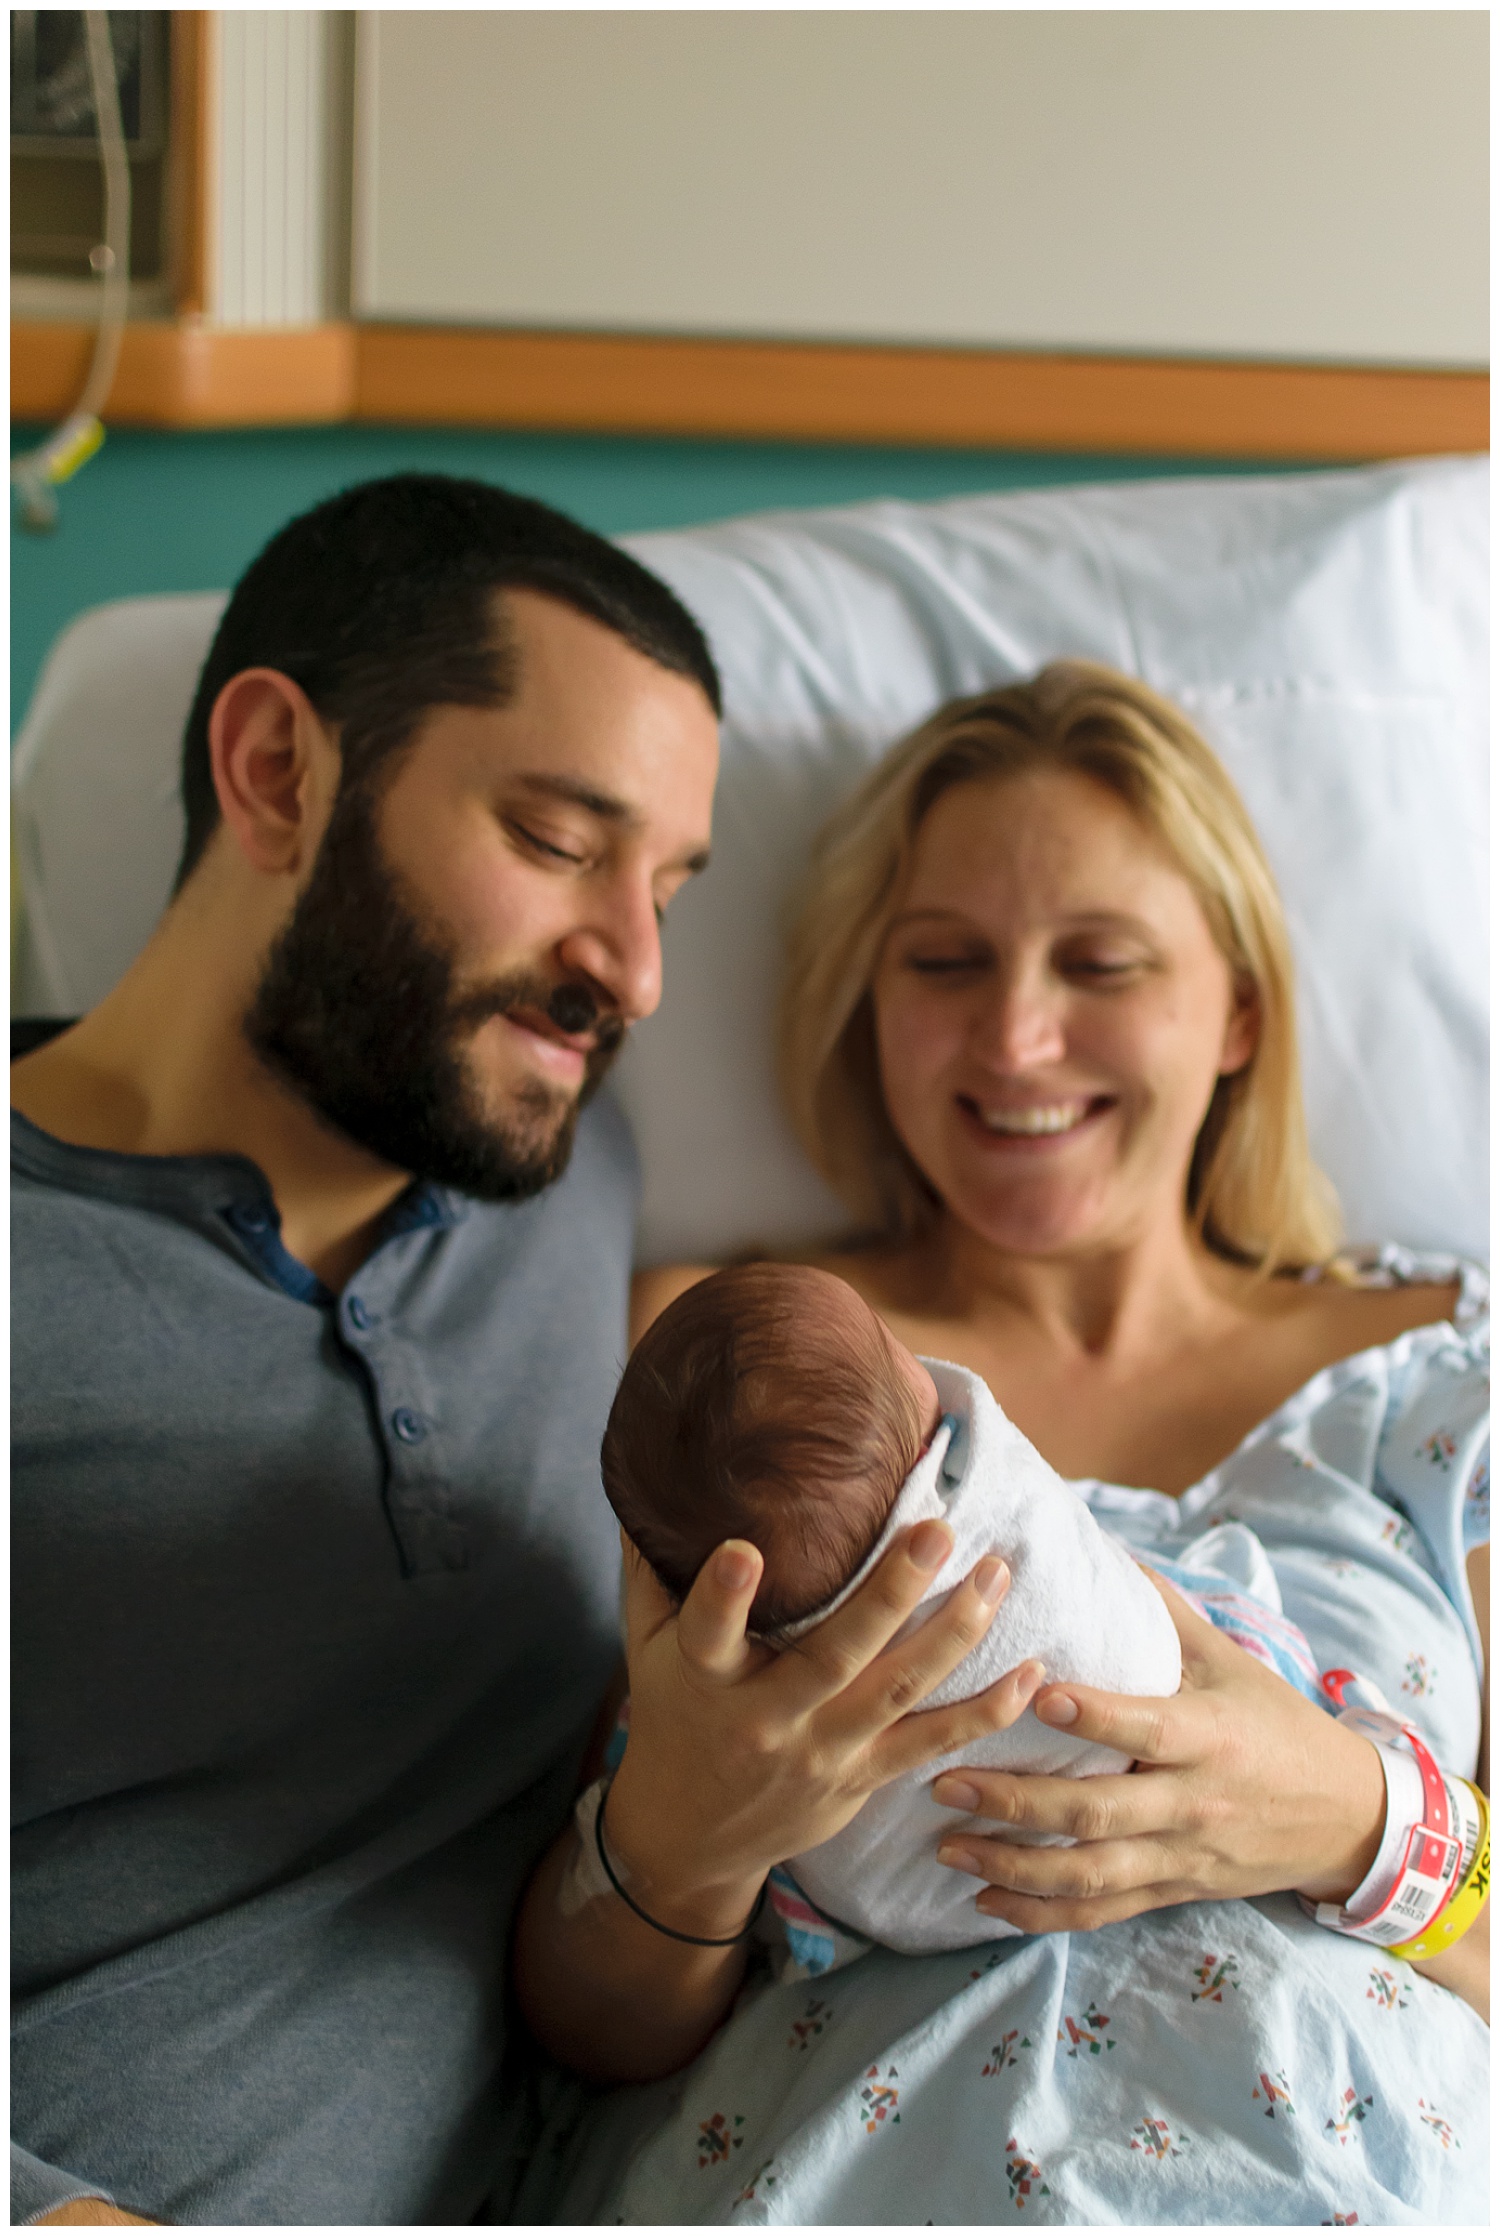 this is an image taken at piedmont hospital during a fresh 48 newborn session. mom and dad are holding the baby girl and smiling and looking at her.